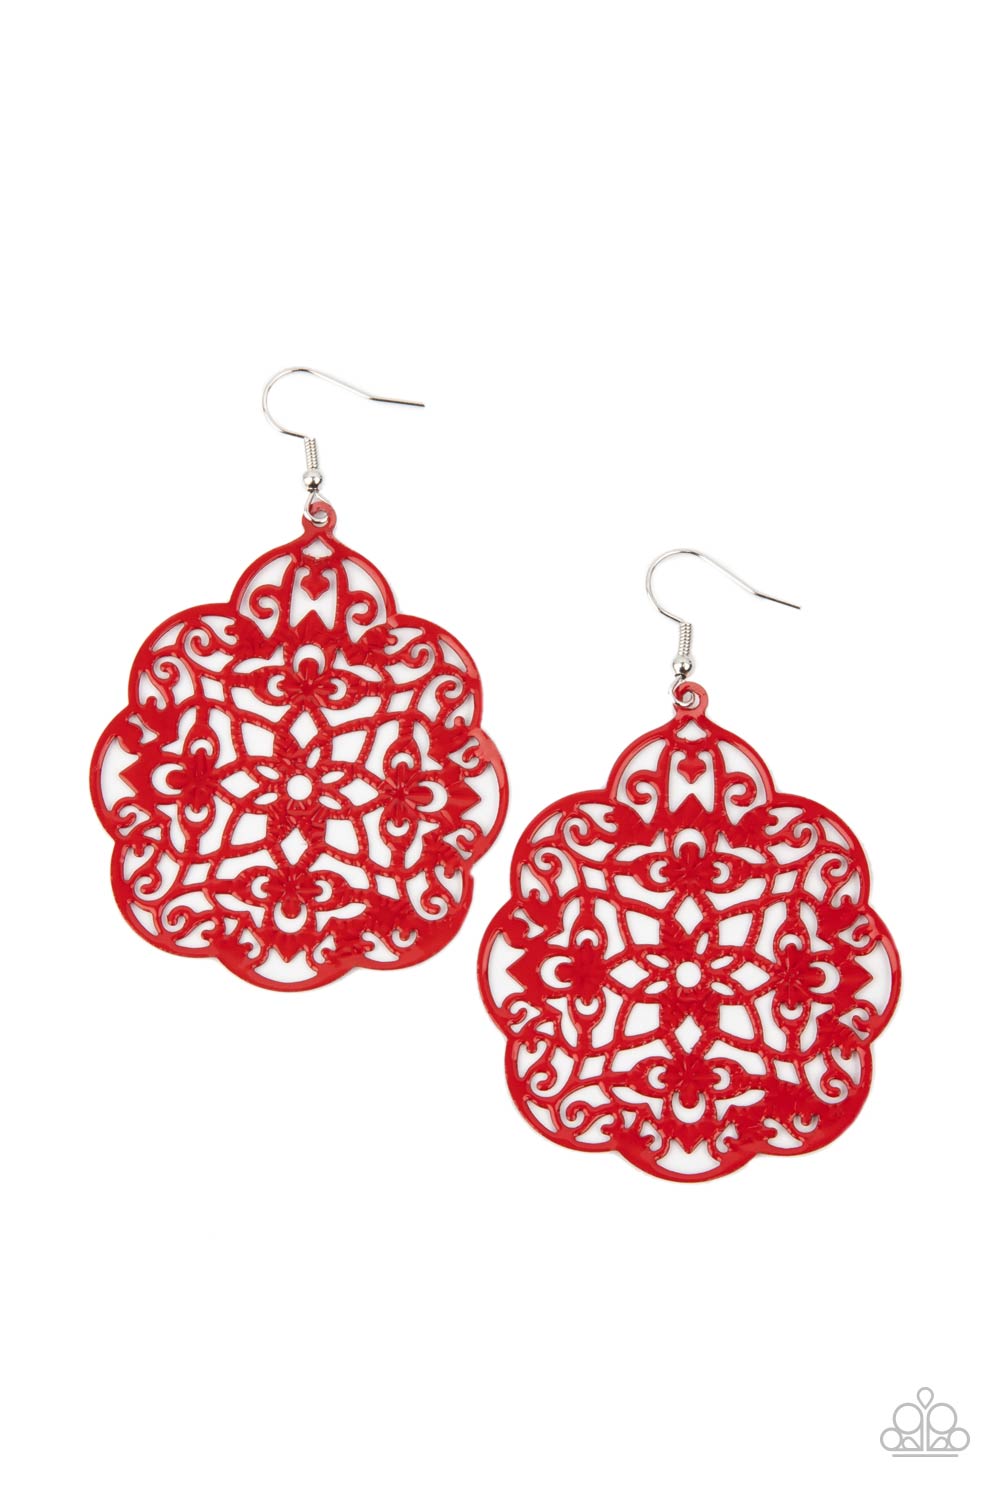 Paparazzi Accessories Mediterranean Eden - Red Earrings - Lady T Accessories